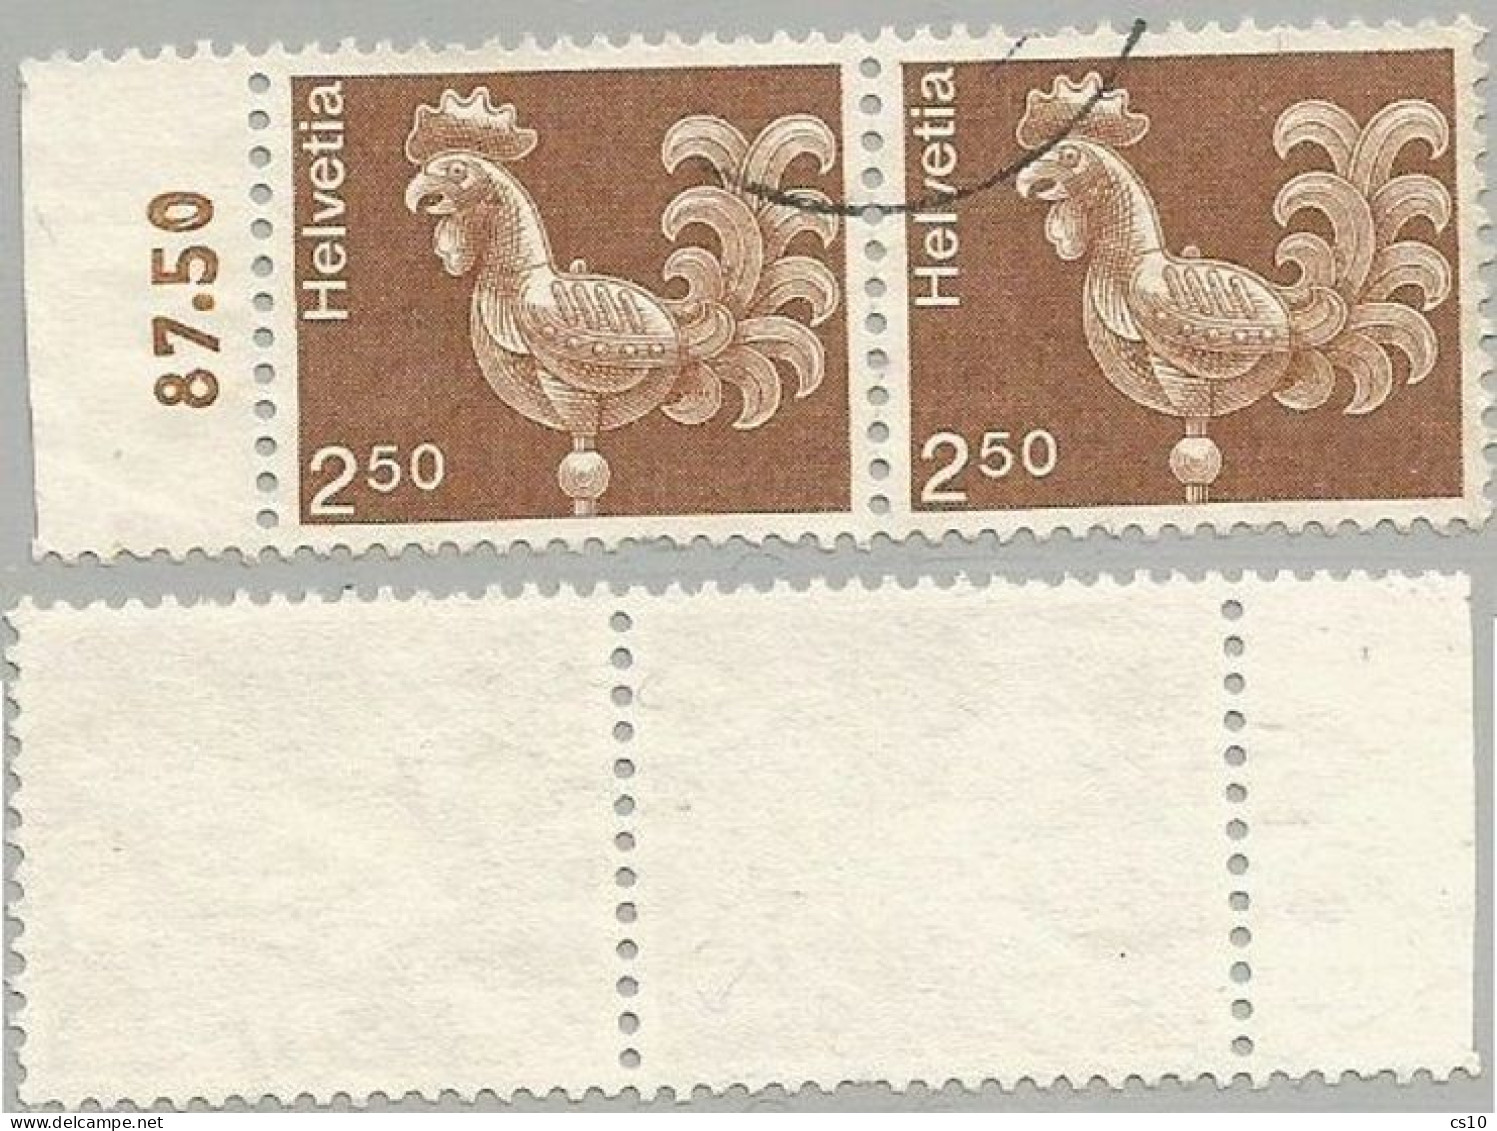 Suisse 1975 Artworks Wheatercock FS.2,50 - Scarce Variety NON FLUO PAPER - #2 Pcs In Horiz. Pair With Sheet Margin - Used Stamps